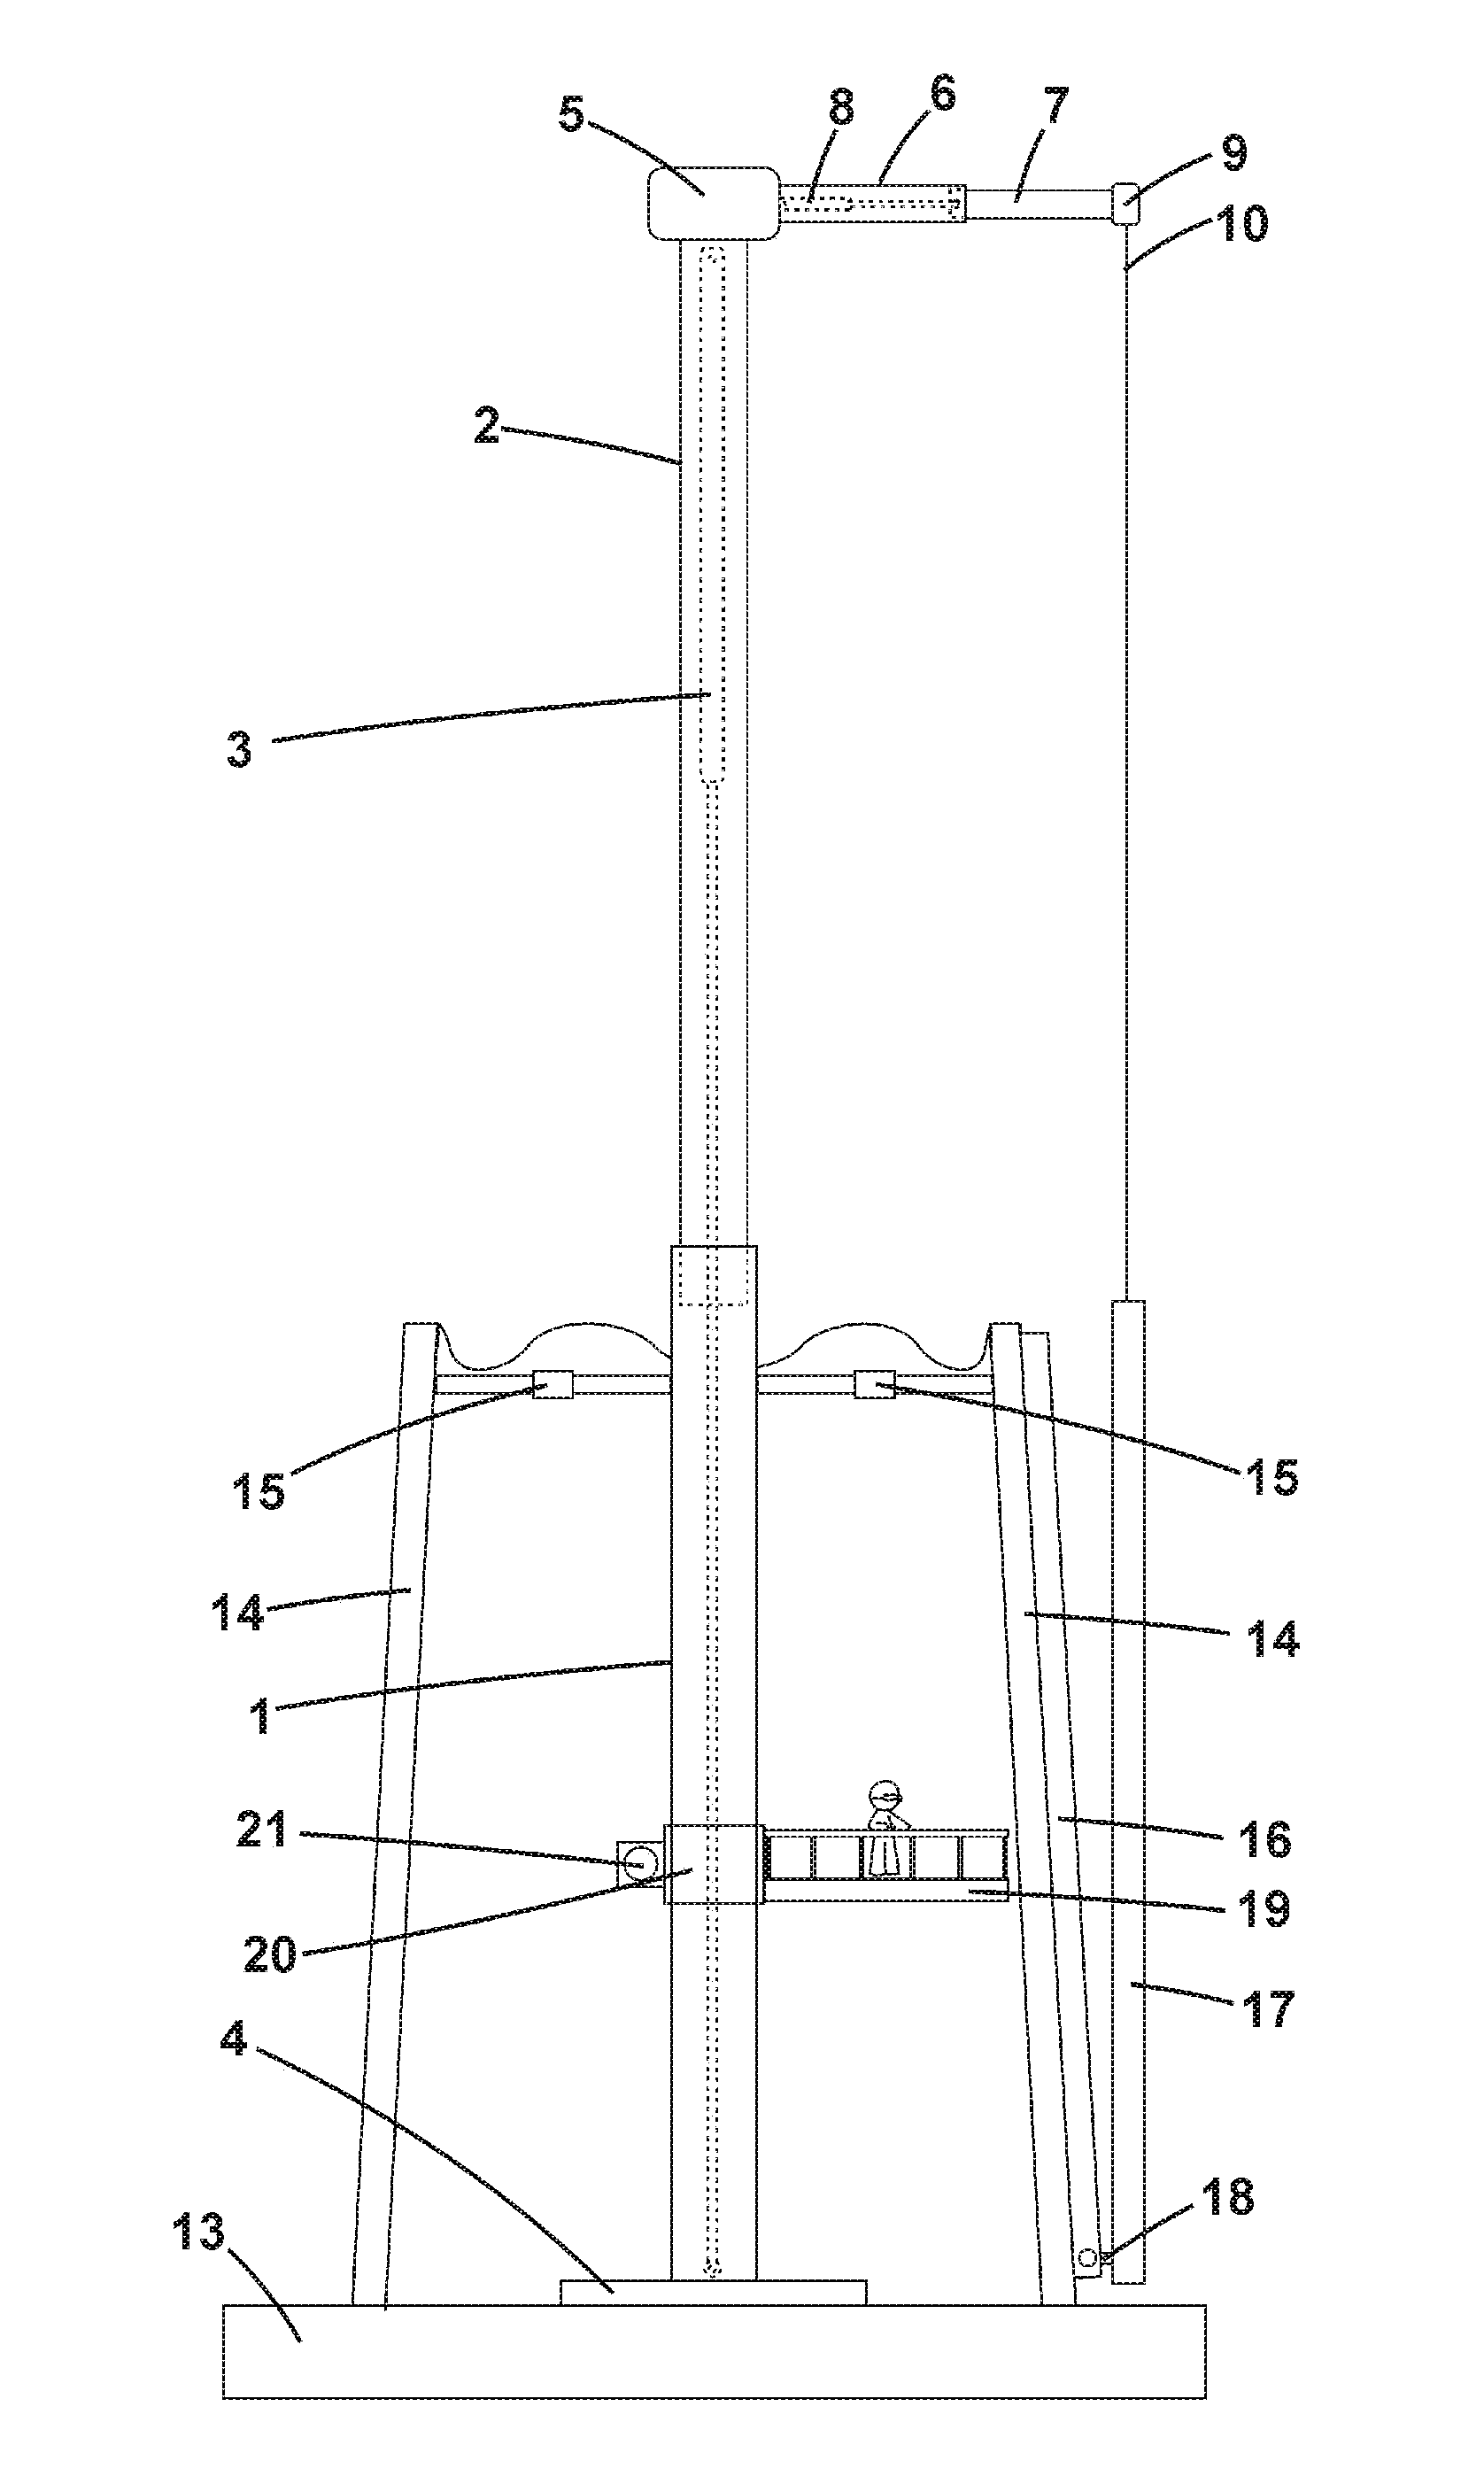 Self-Climbing Telescopic Crane and Method for Mounting Pre-Fabricated Concrete Towers